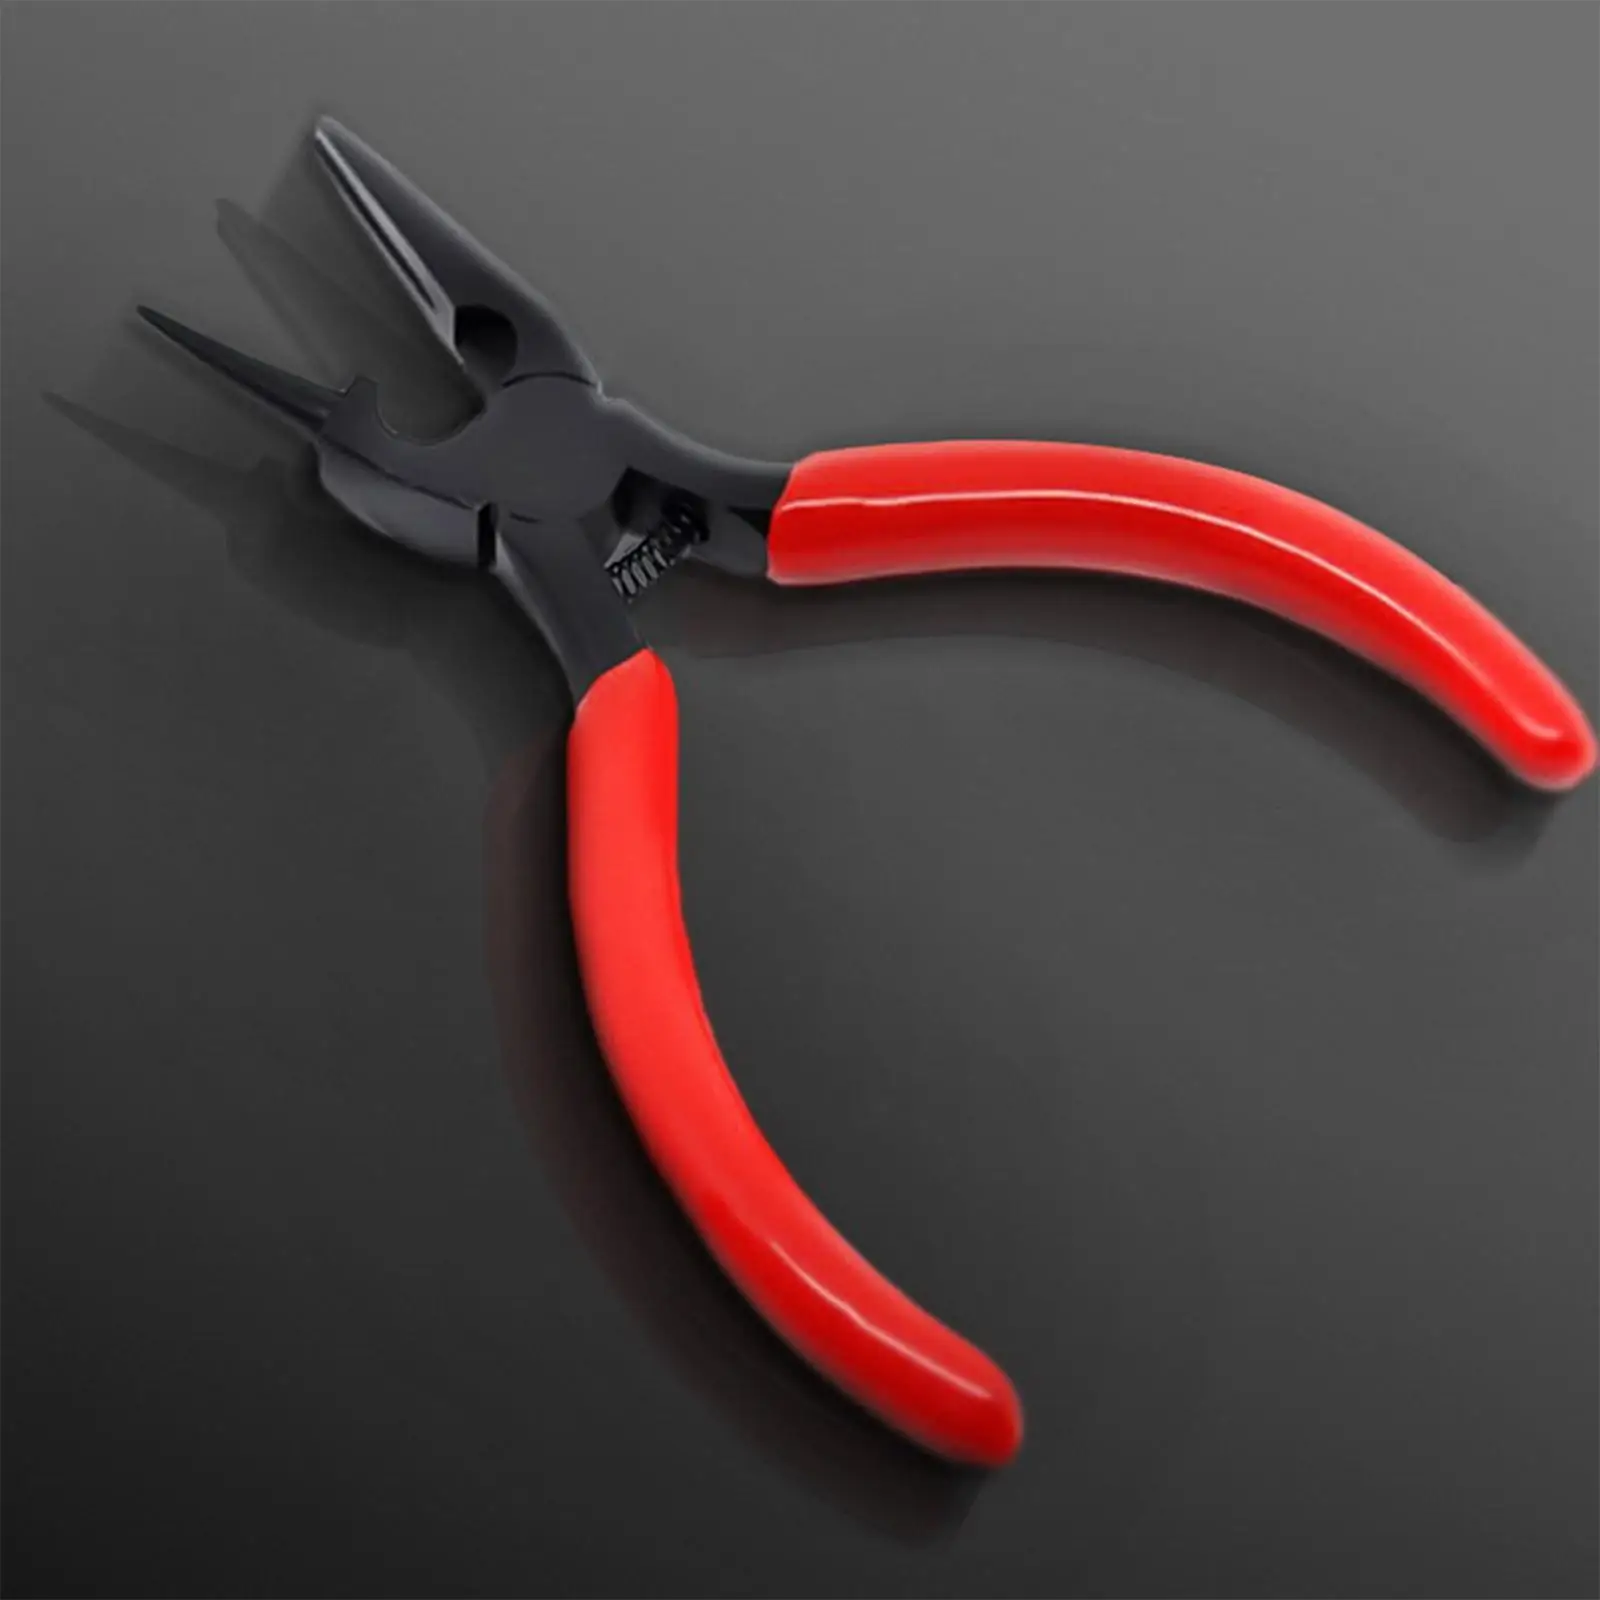 Cutting Wire Pliers Sharp Nose Pliers Concave Multitool Repair Tools Craft Ring Wire DIY Jewelry Pliers for Necklace Wrapping